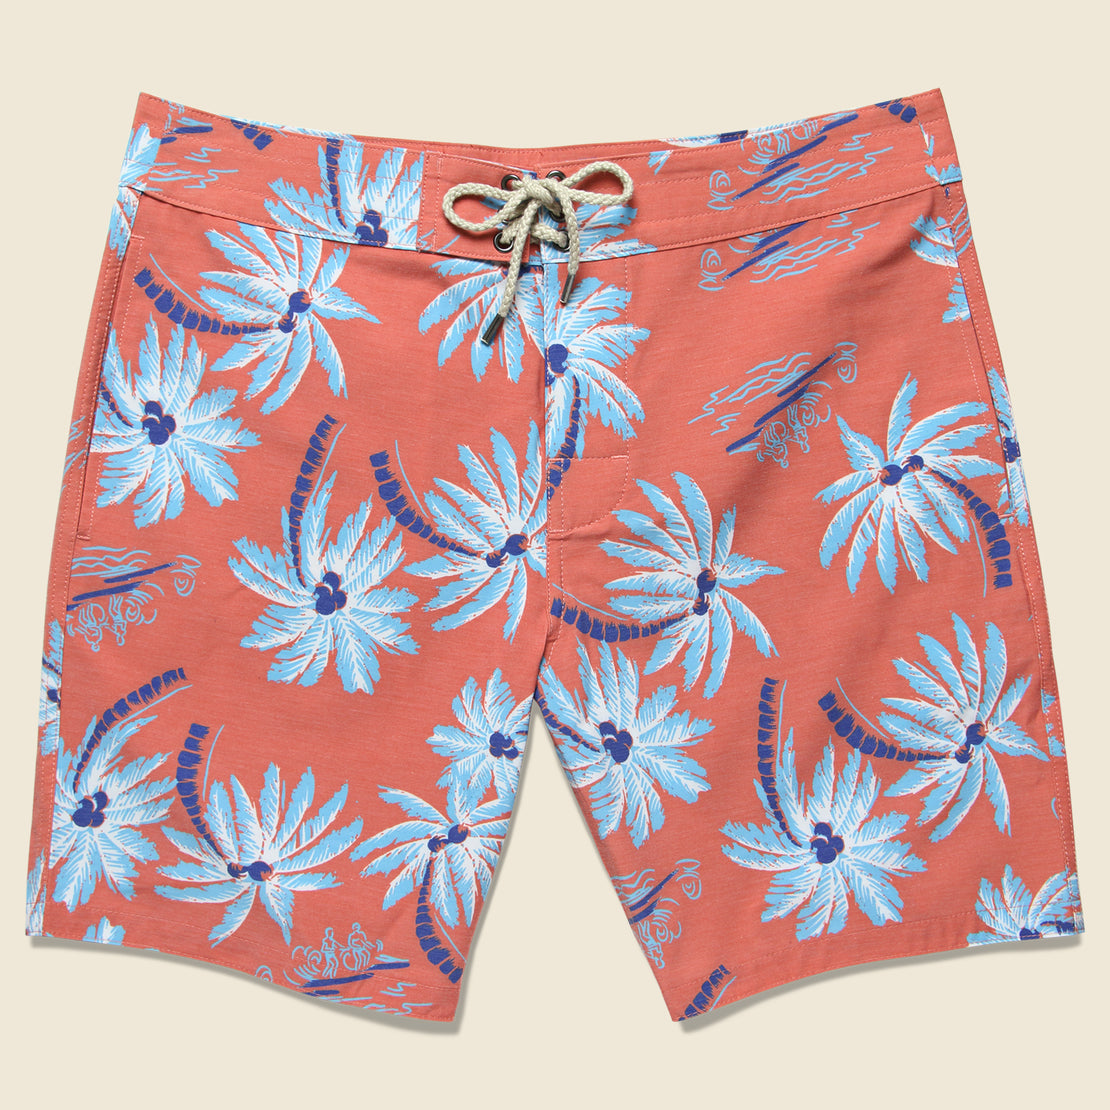 Faherty Classic 7" Boardshort - Red Palm